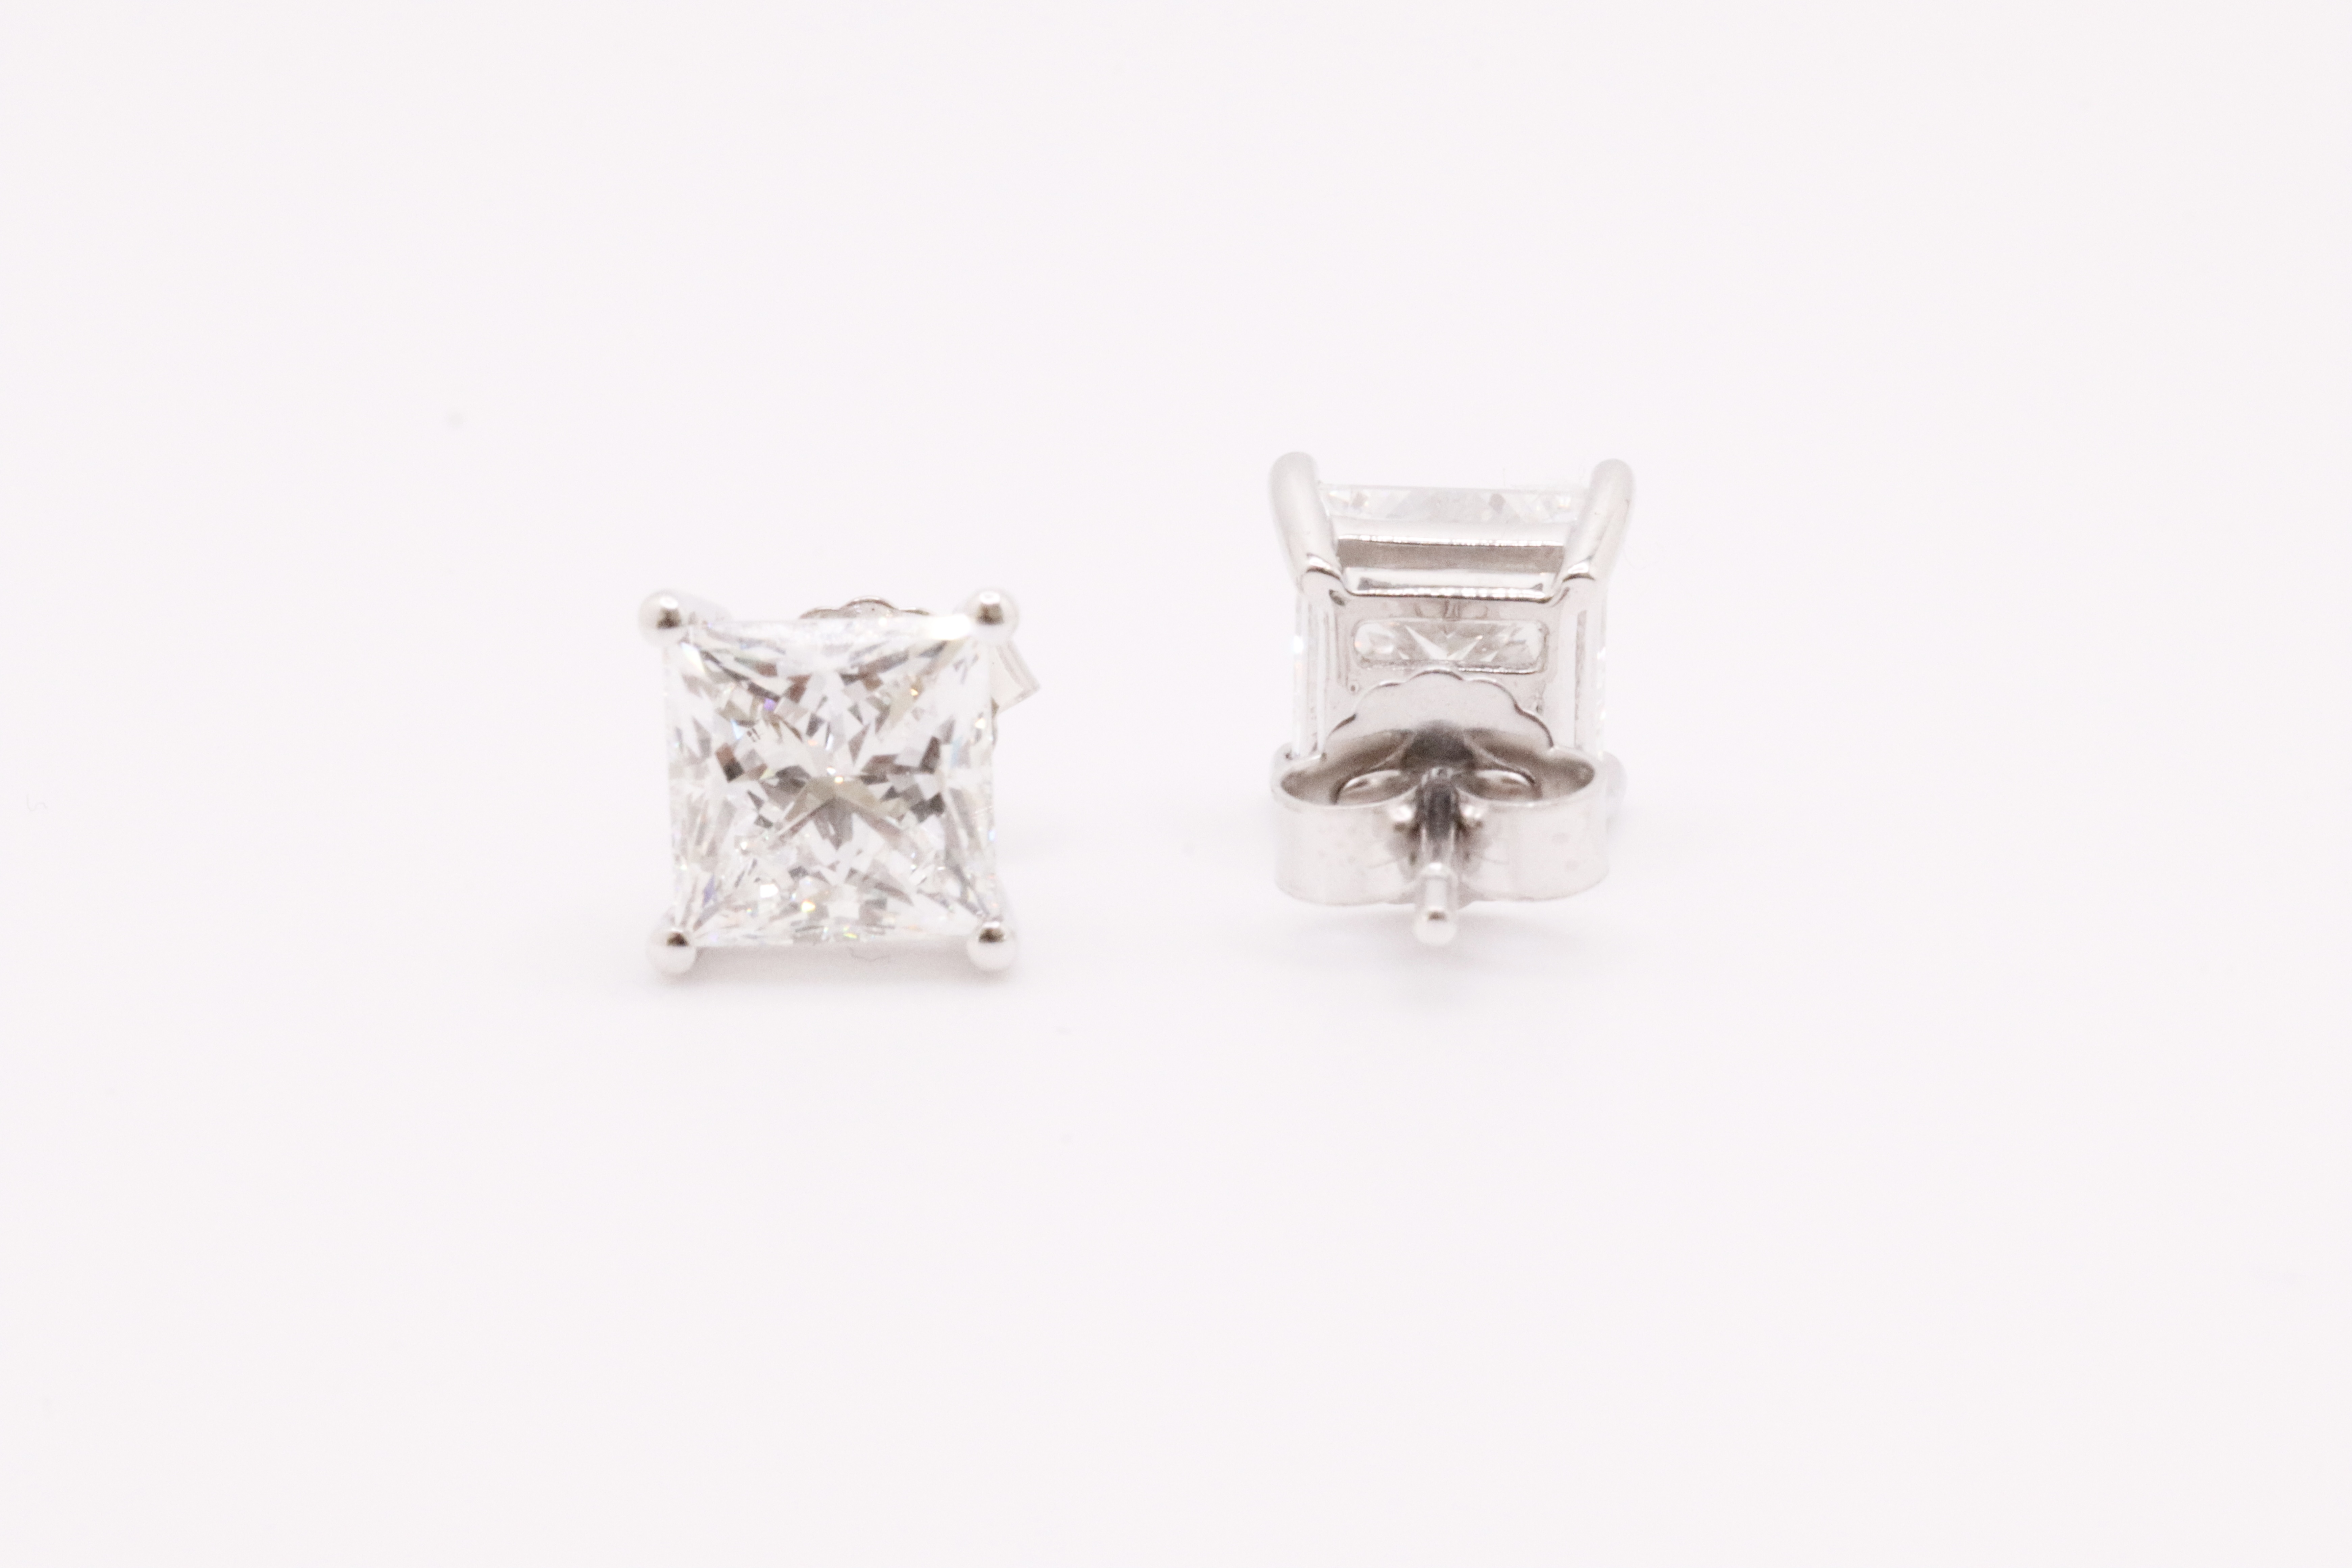 ** ON SALE ** Princess Cut 5.00 Carat Diamond Earrings Set in 18kt White Gold - F Colour SI Clarity - Image 3 of 5